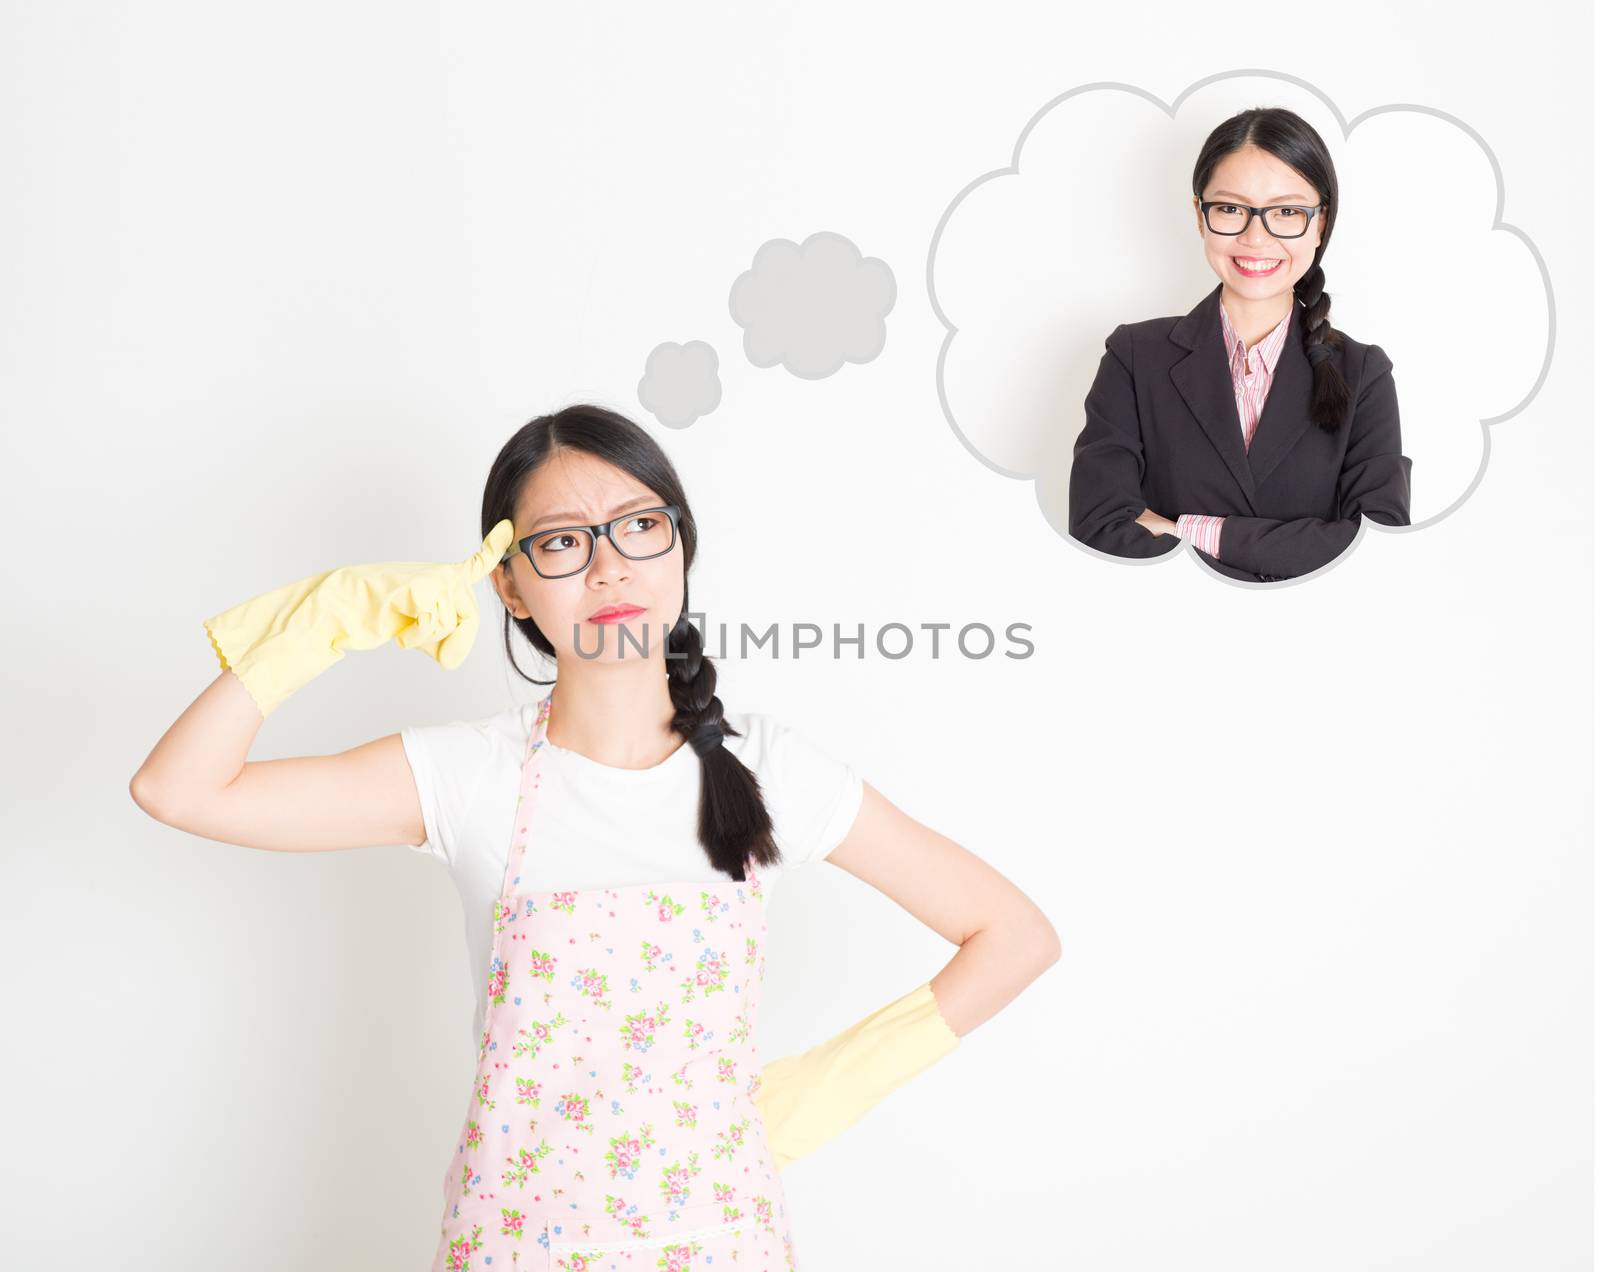 Cleaning lady dreaming of changing job  by szefei